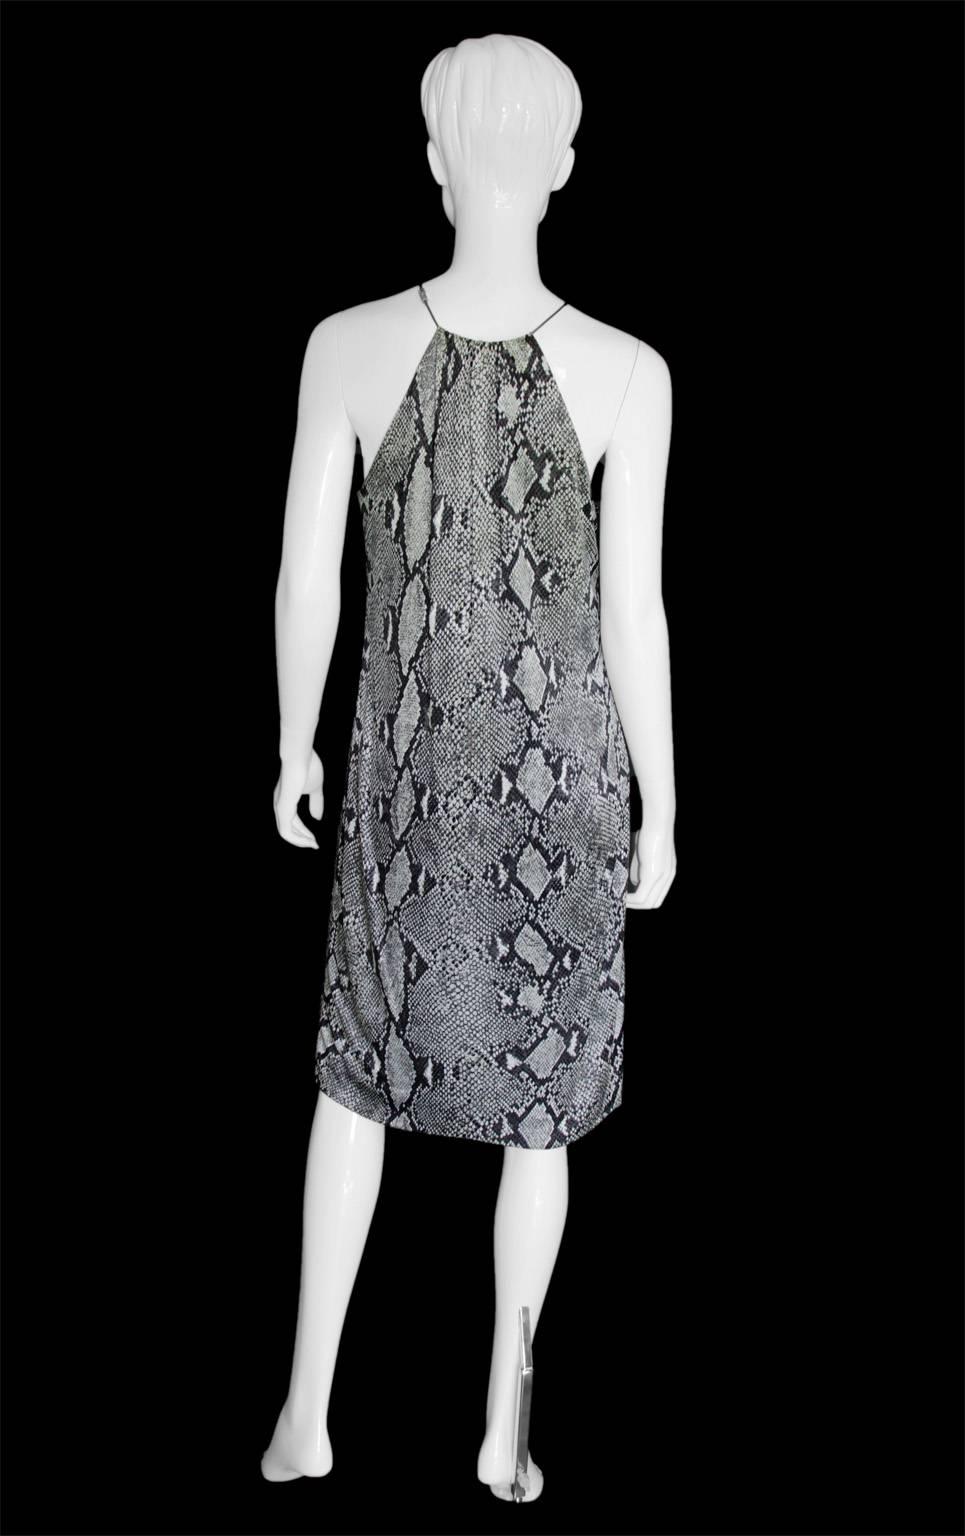 Gray Free Shipping:Rare & Iconic Tom Ford For Gucci SS2000 Python Print Runway Dress!